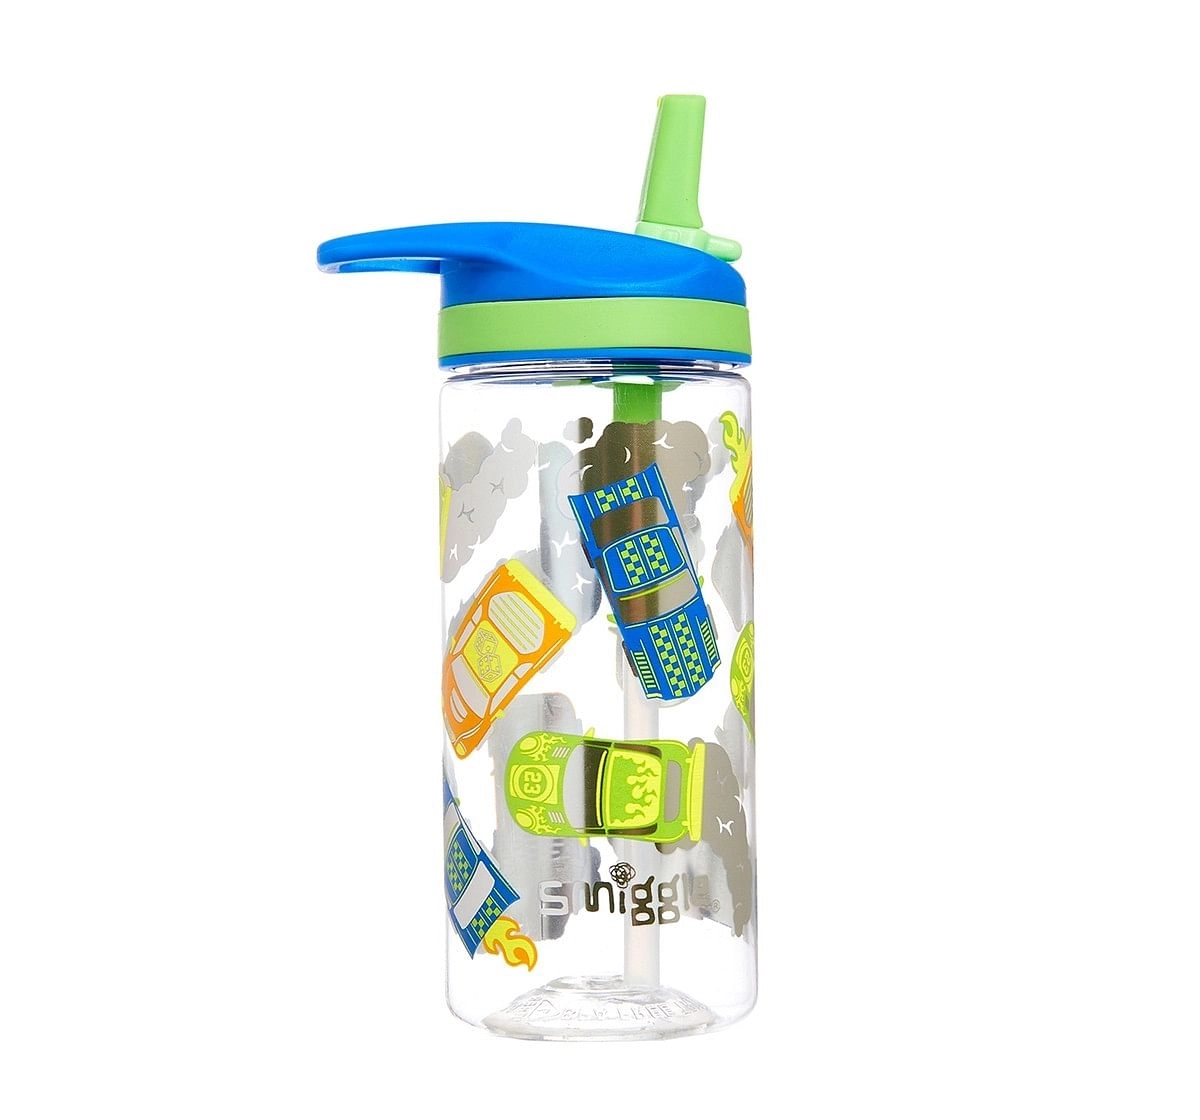 Smiggle Whirl Junior Bottle with Flip Top Spout - Car Print Bags for Kids age 3Y+ (Royal Blue)